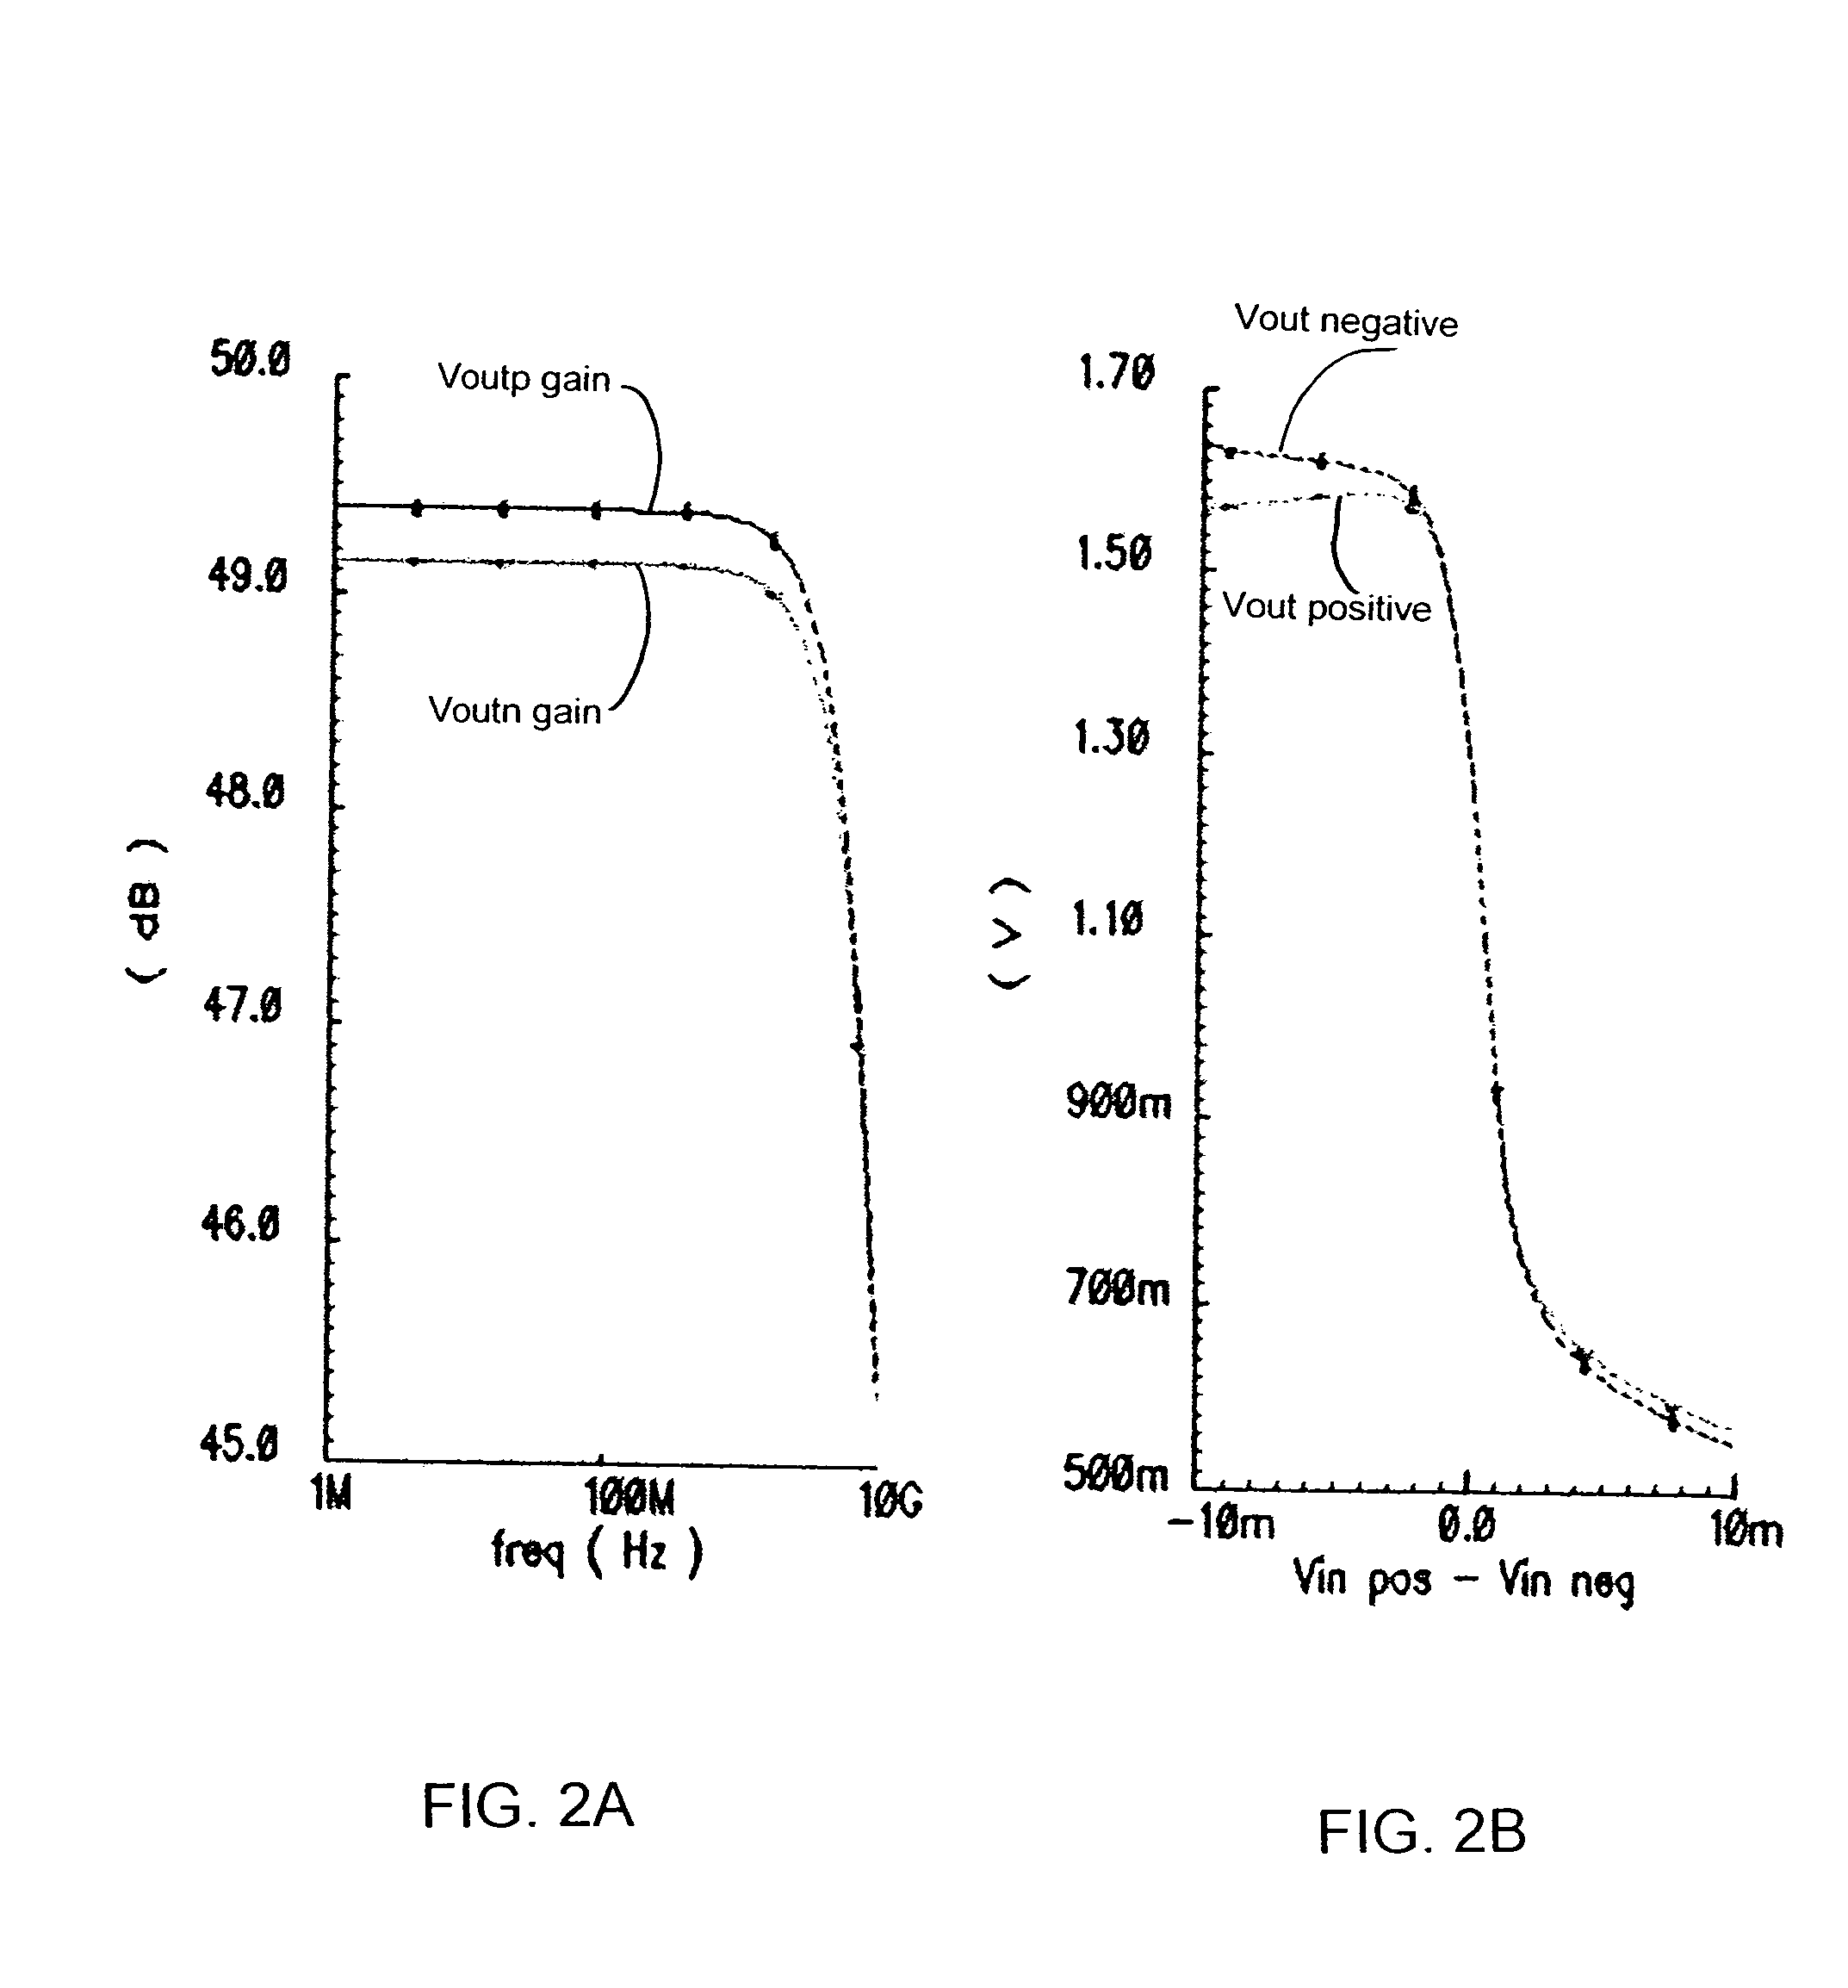 Differential amplifier with current source controlled through differential feedback